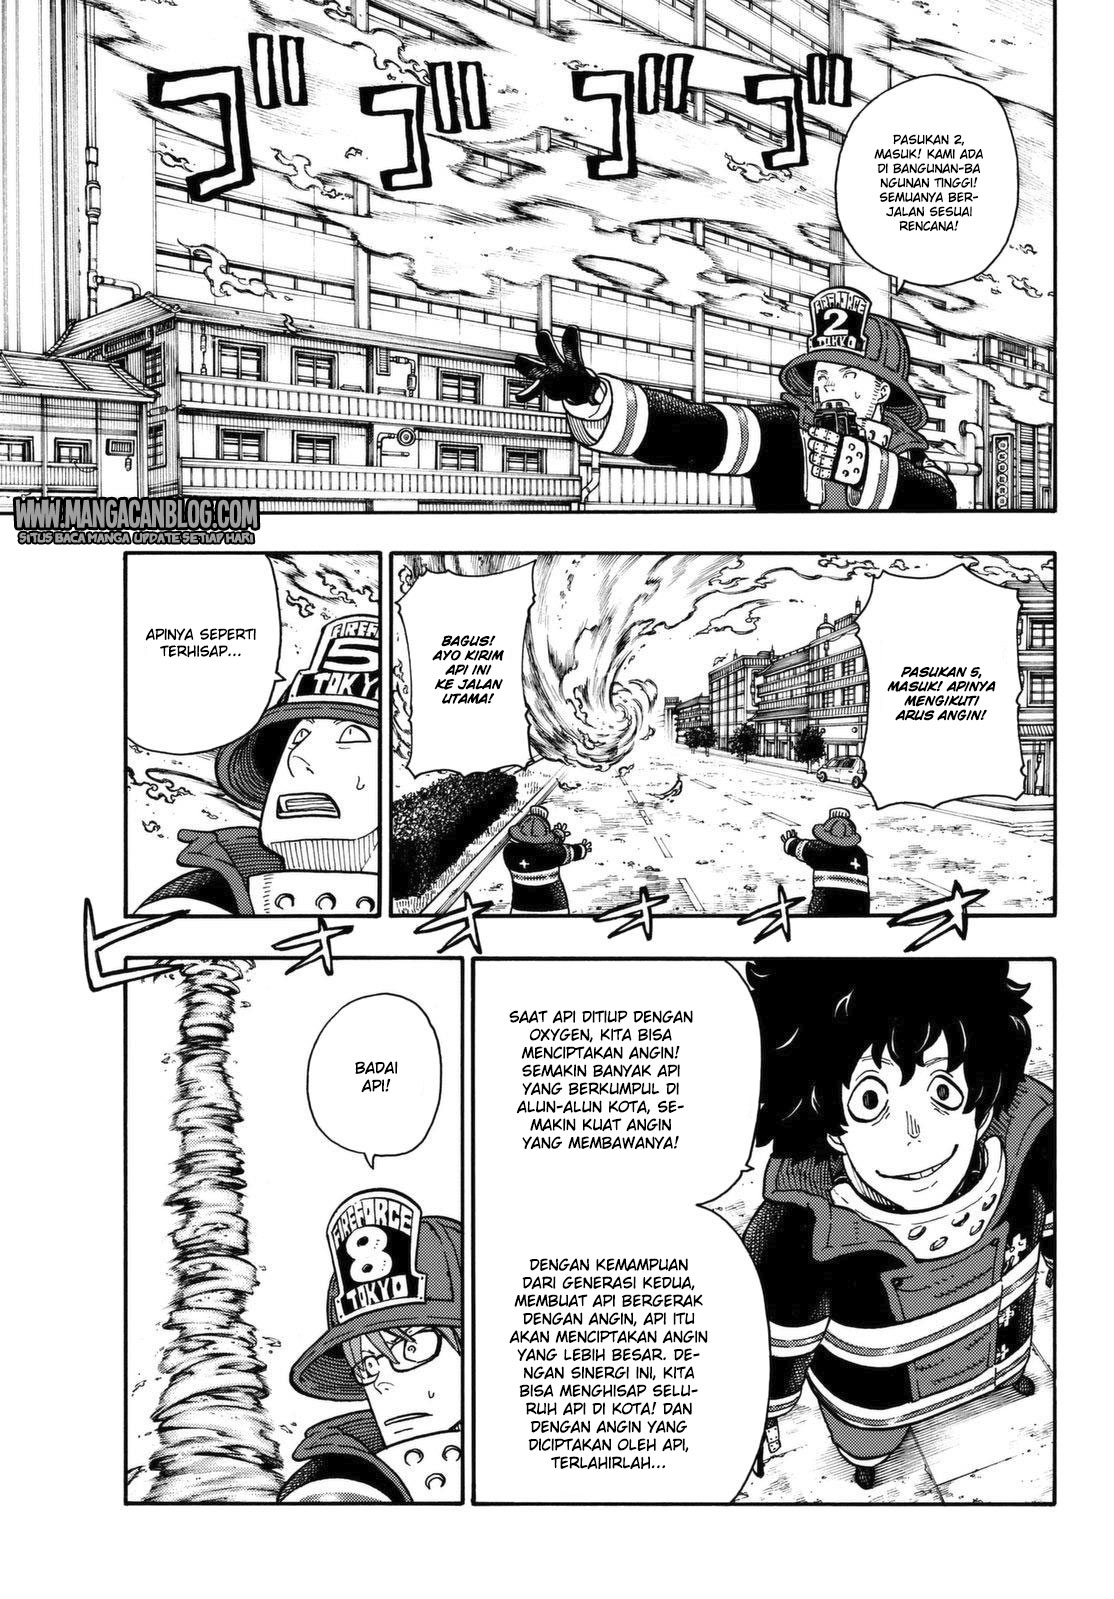 Fire Brigade of Flames Chapter 109